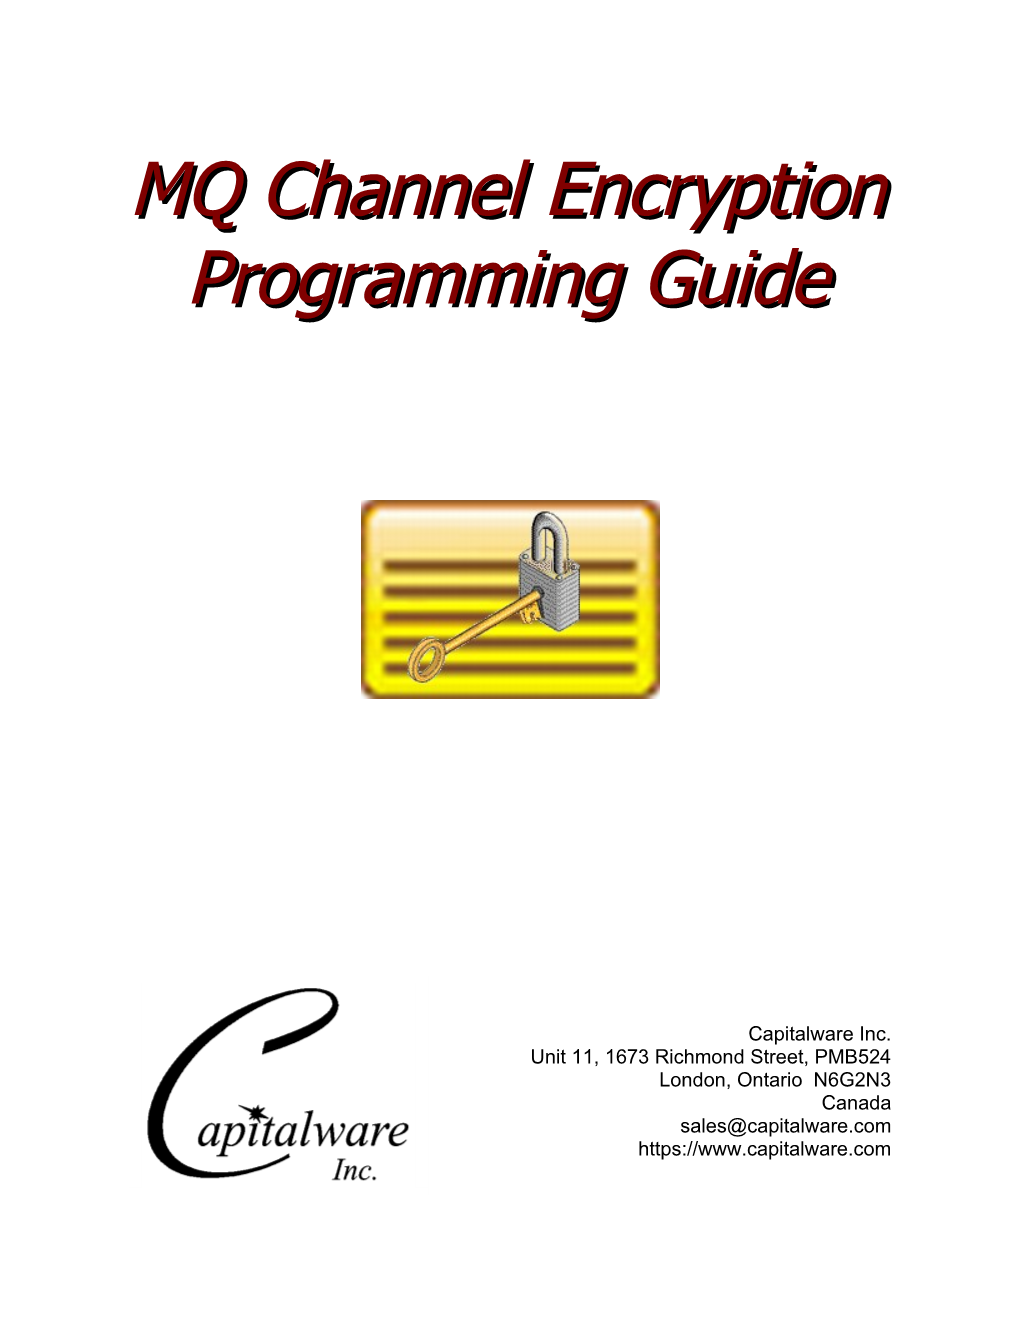 MQCE Programming Guide Page Ii Table of Contents